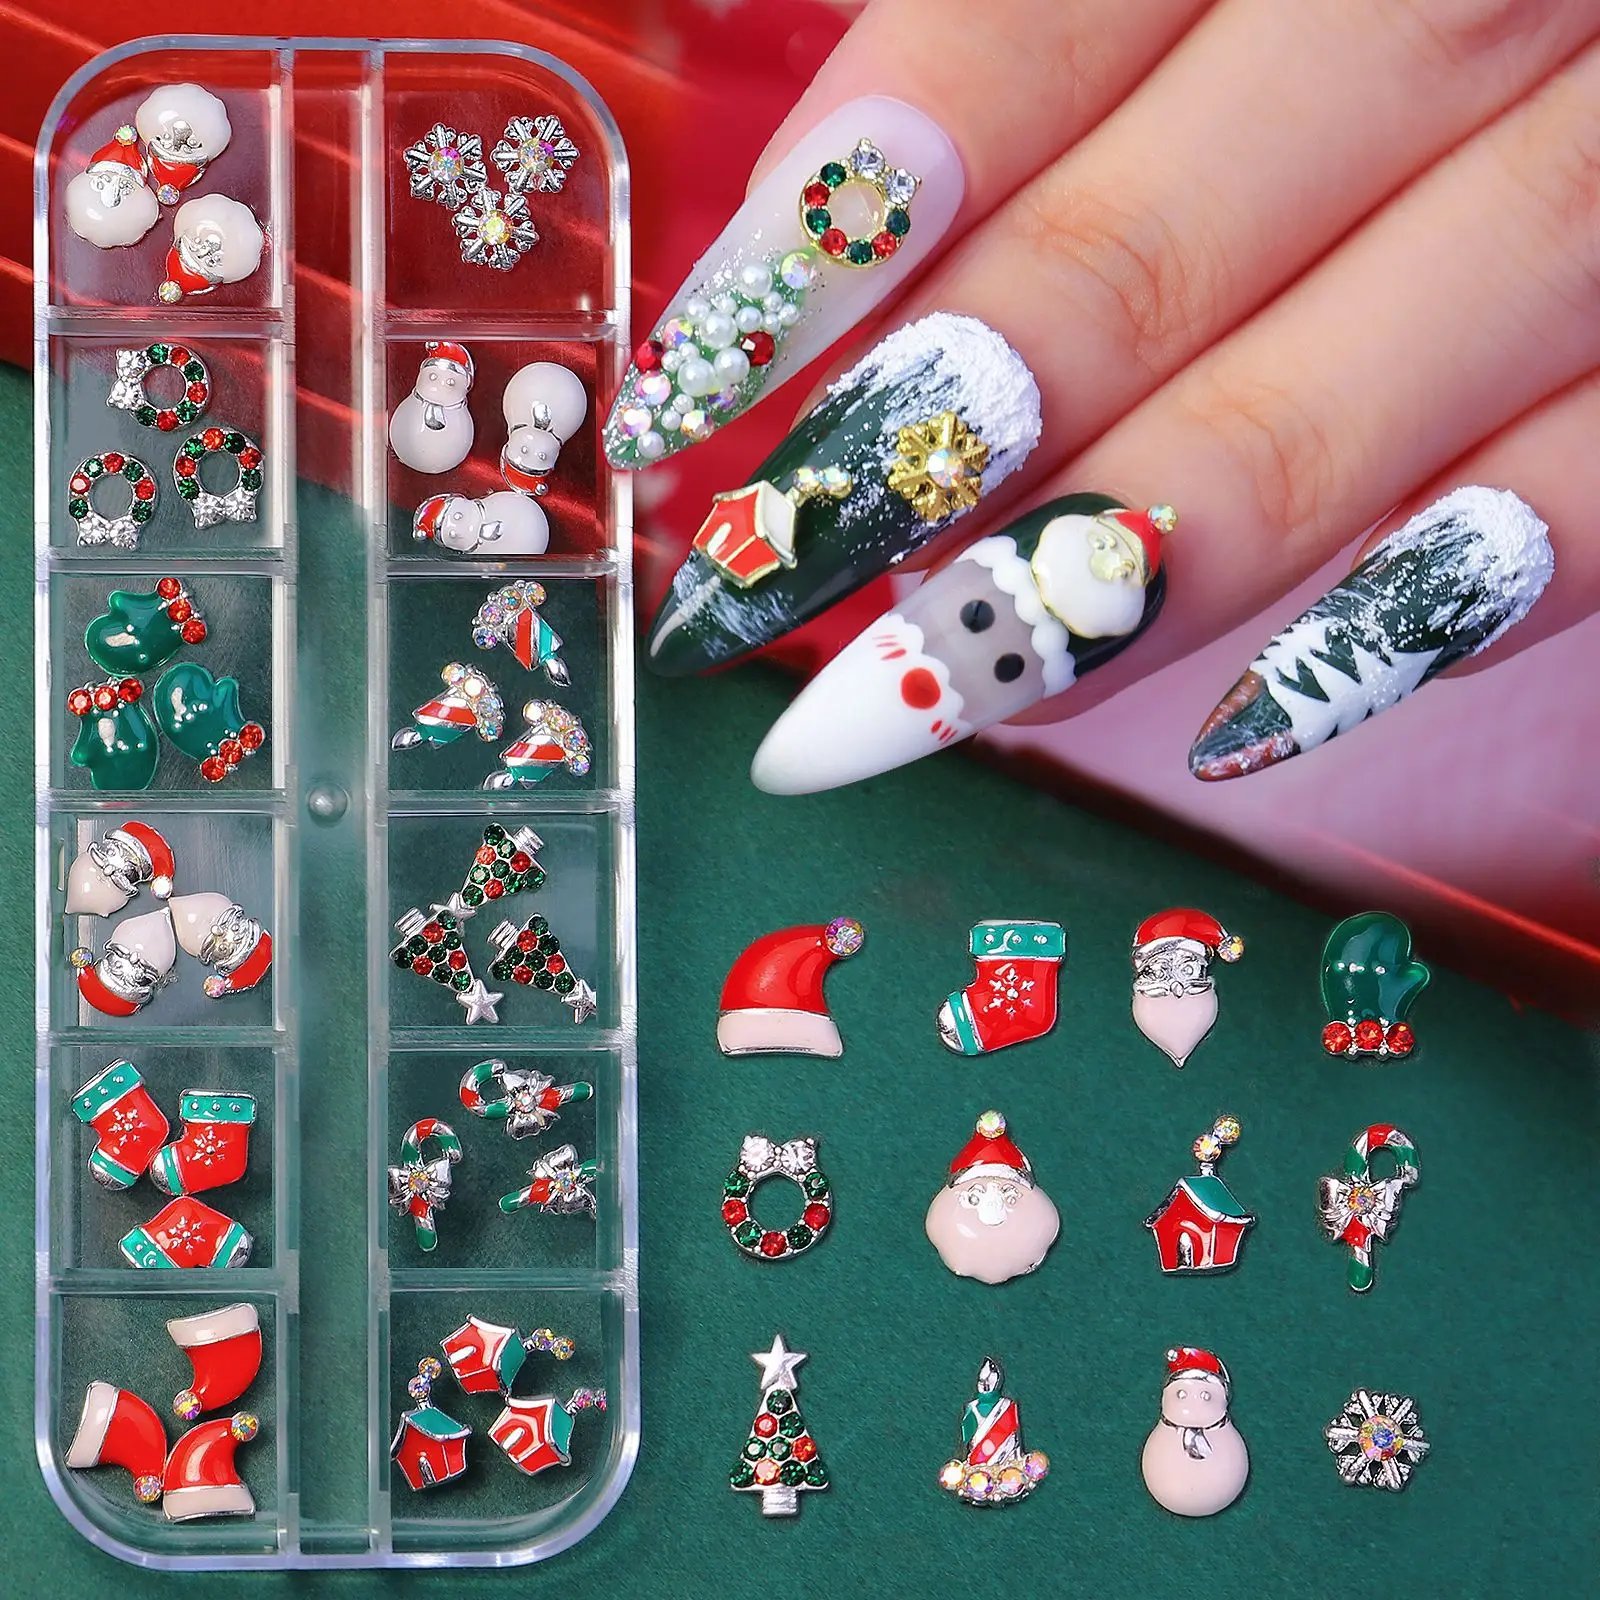 3D CHRISTMAS NAILS Art Stickers Snow Self Adhesive Decals For Nail Tips  Design $6.12 - PicClick AU